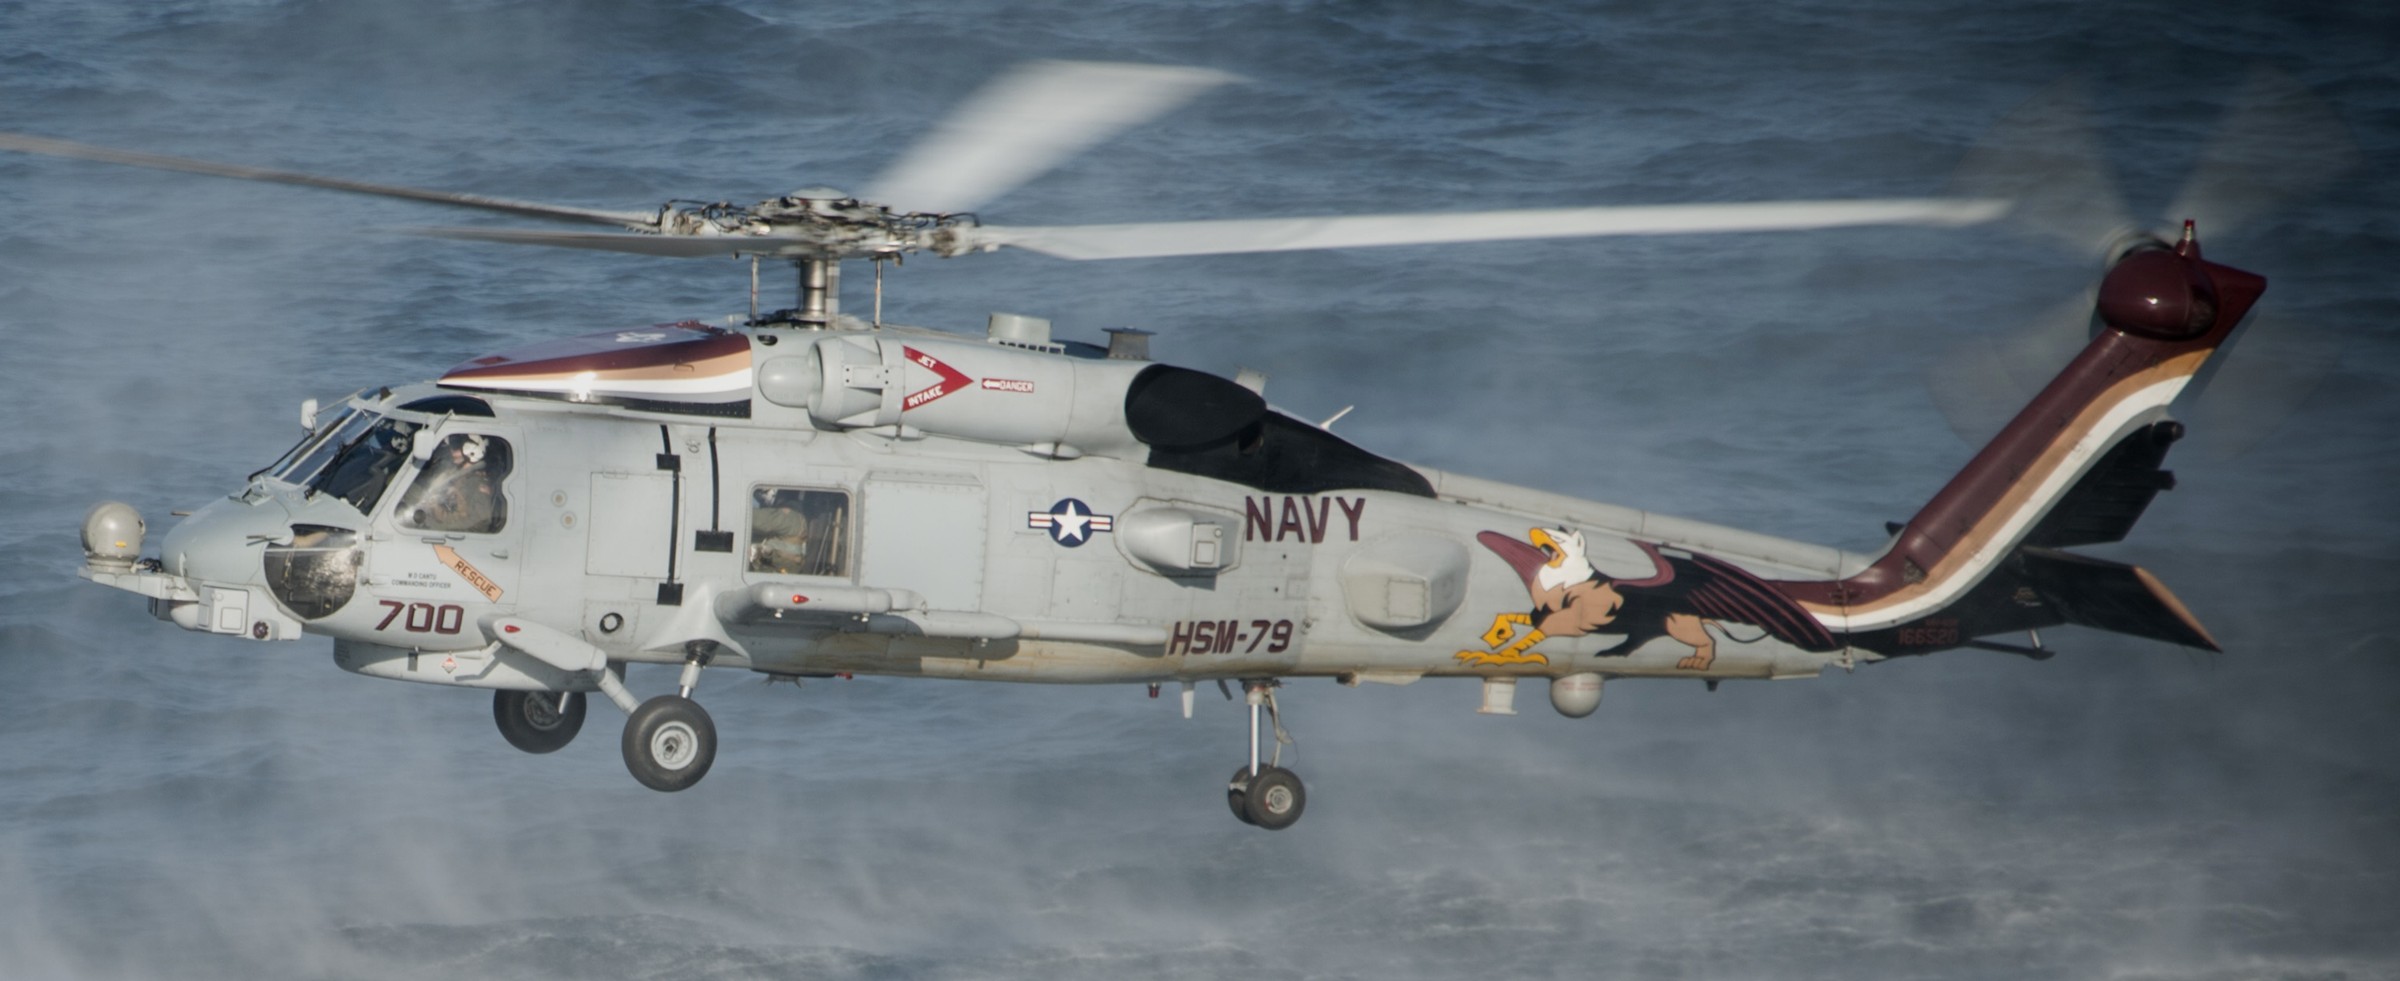 hsm-79 griffins helicopter maritime strike squadron mh-60r seahawk special livery painting 05